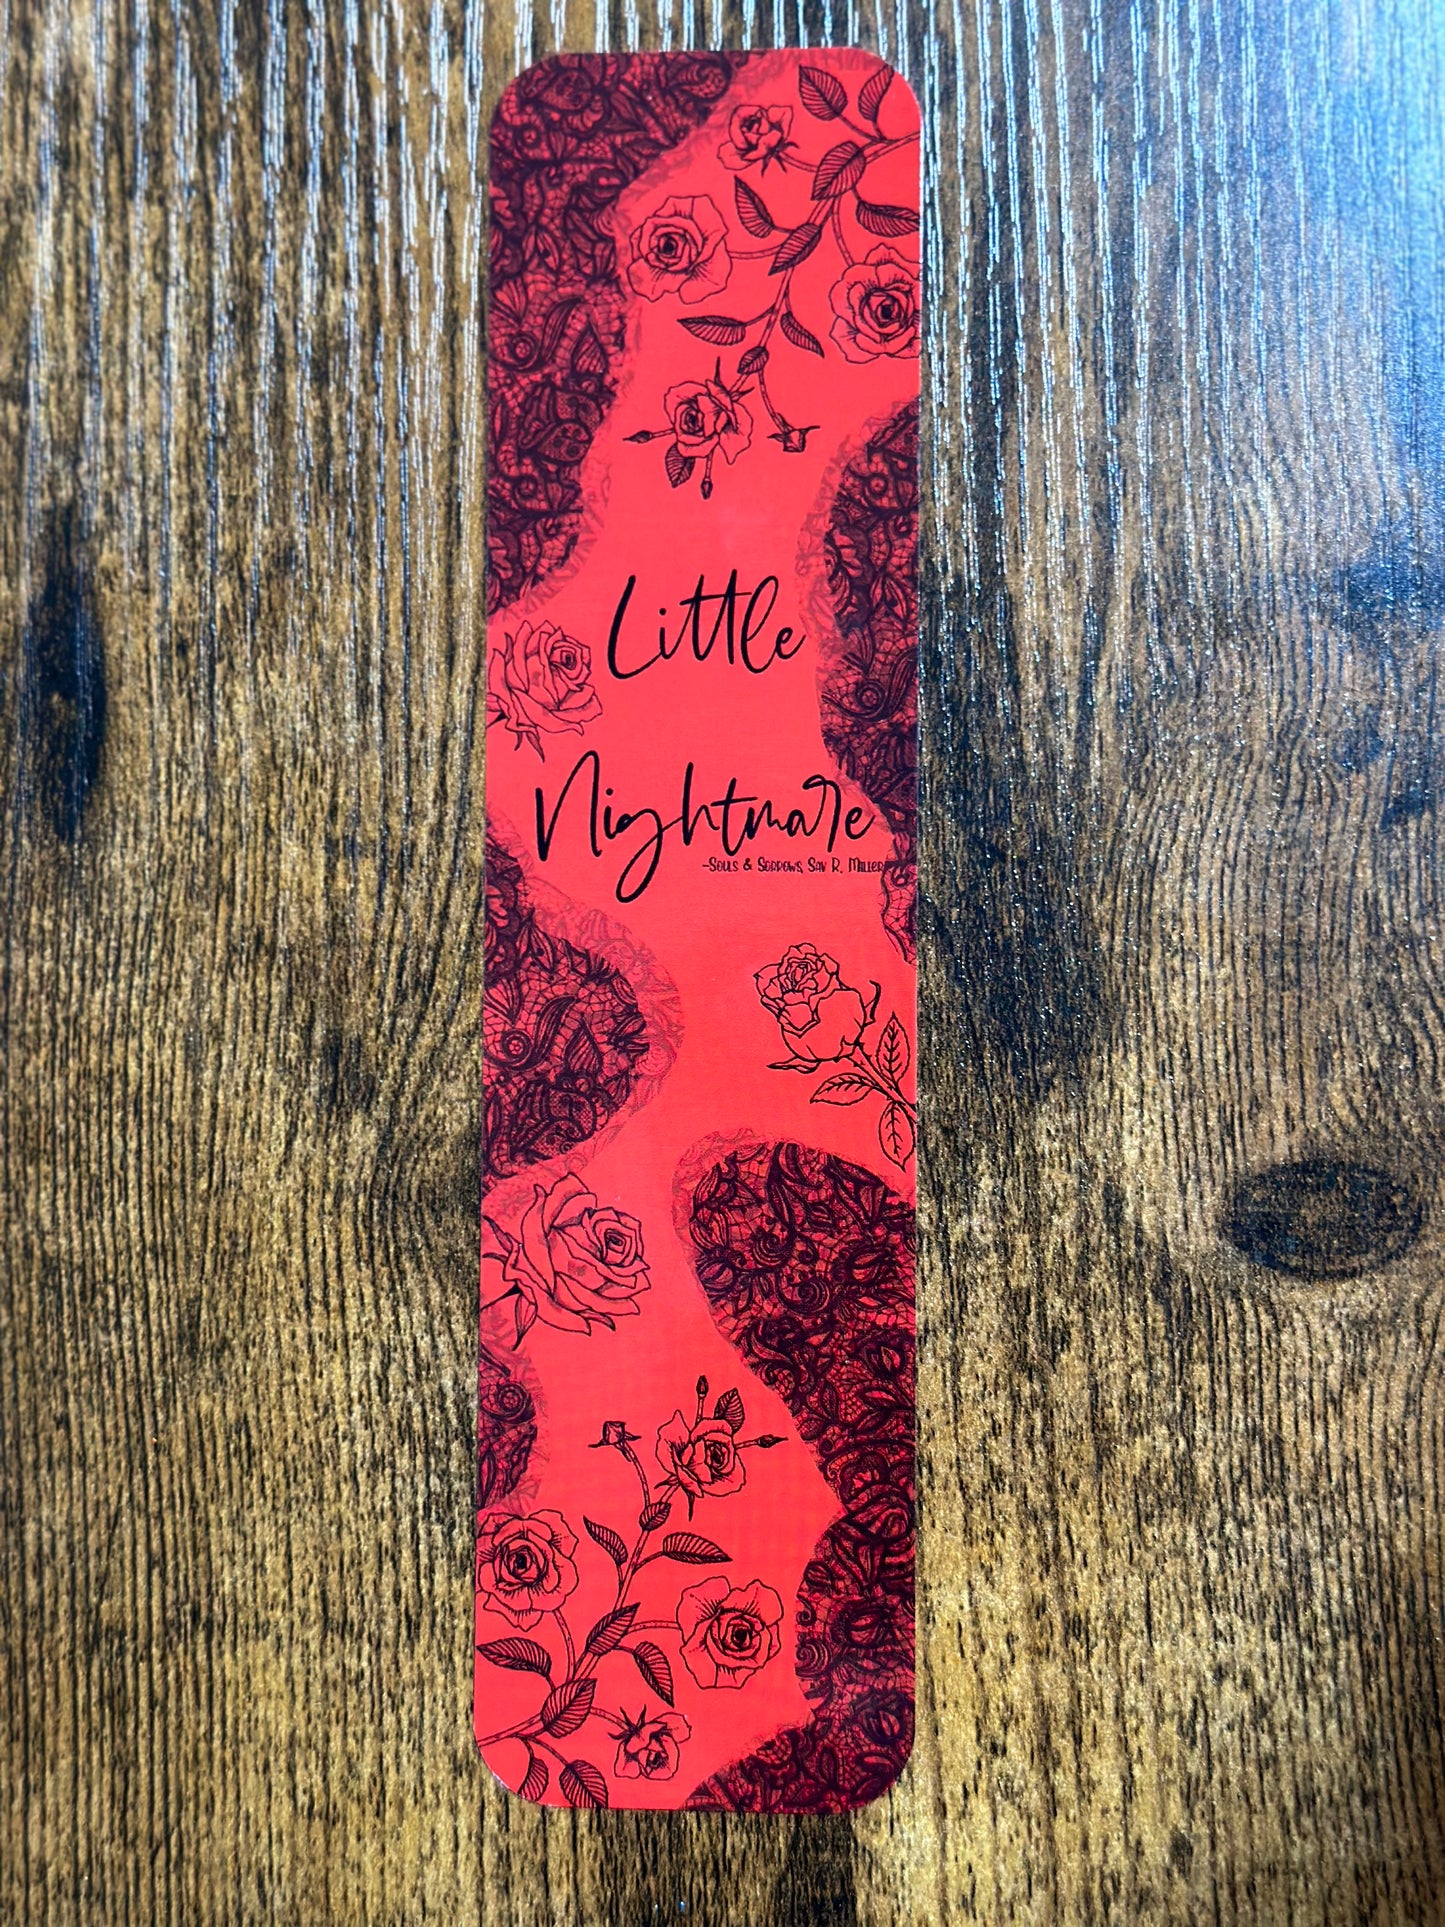 "Little Nightmare" Souls and Sorrows Bookmark